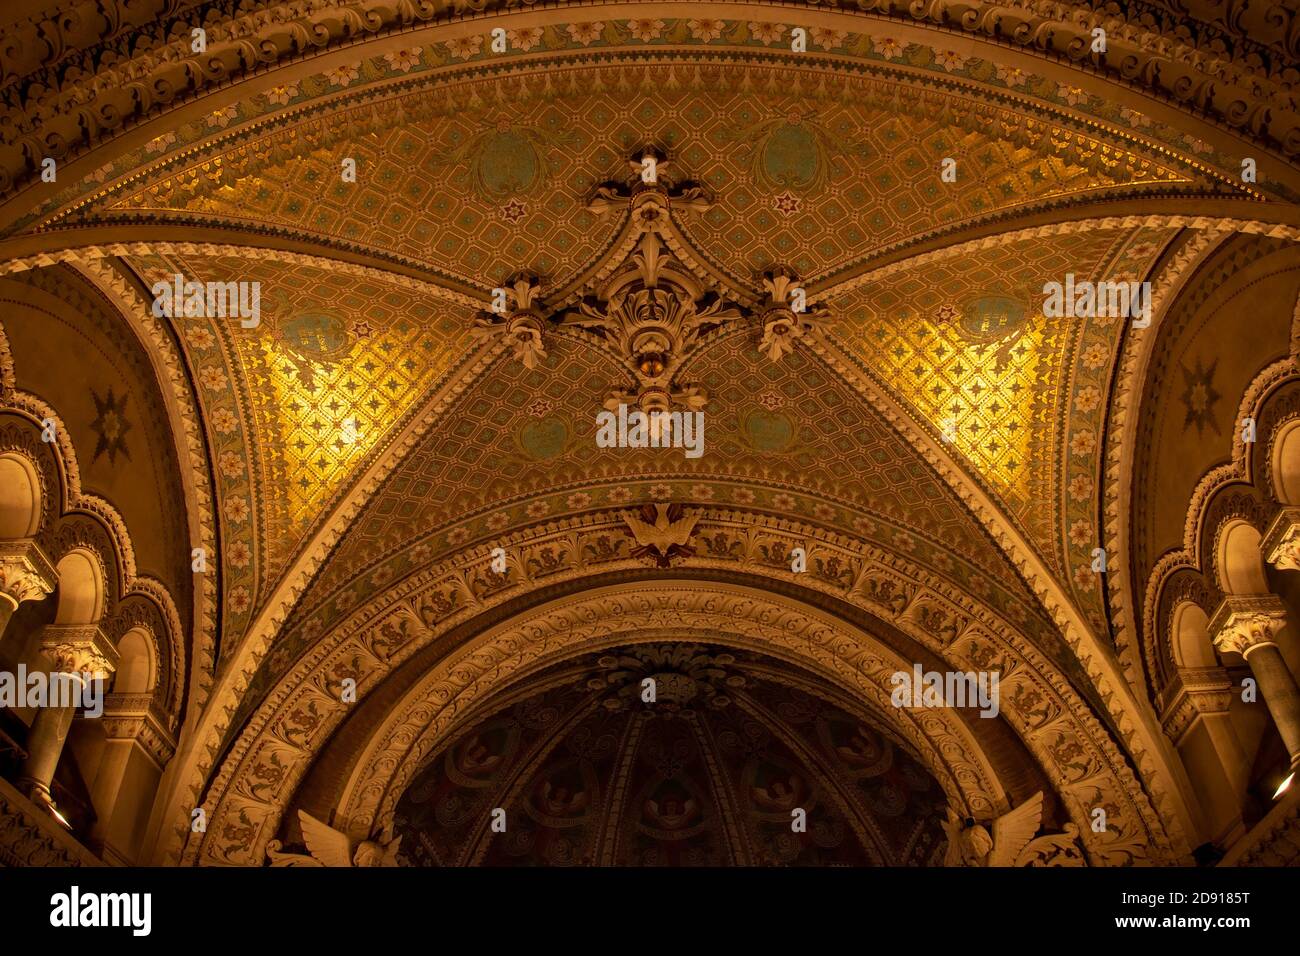 Lyon, France - August 19, 2019. Interior of the Basilica of Notre-Dame de Fourviere in Lyon, Rhone-Alpes, France. Stock Photo